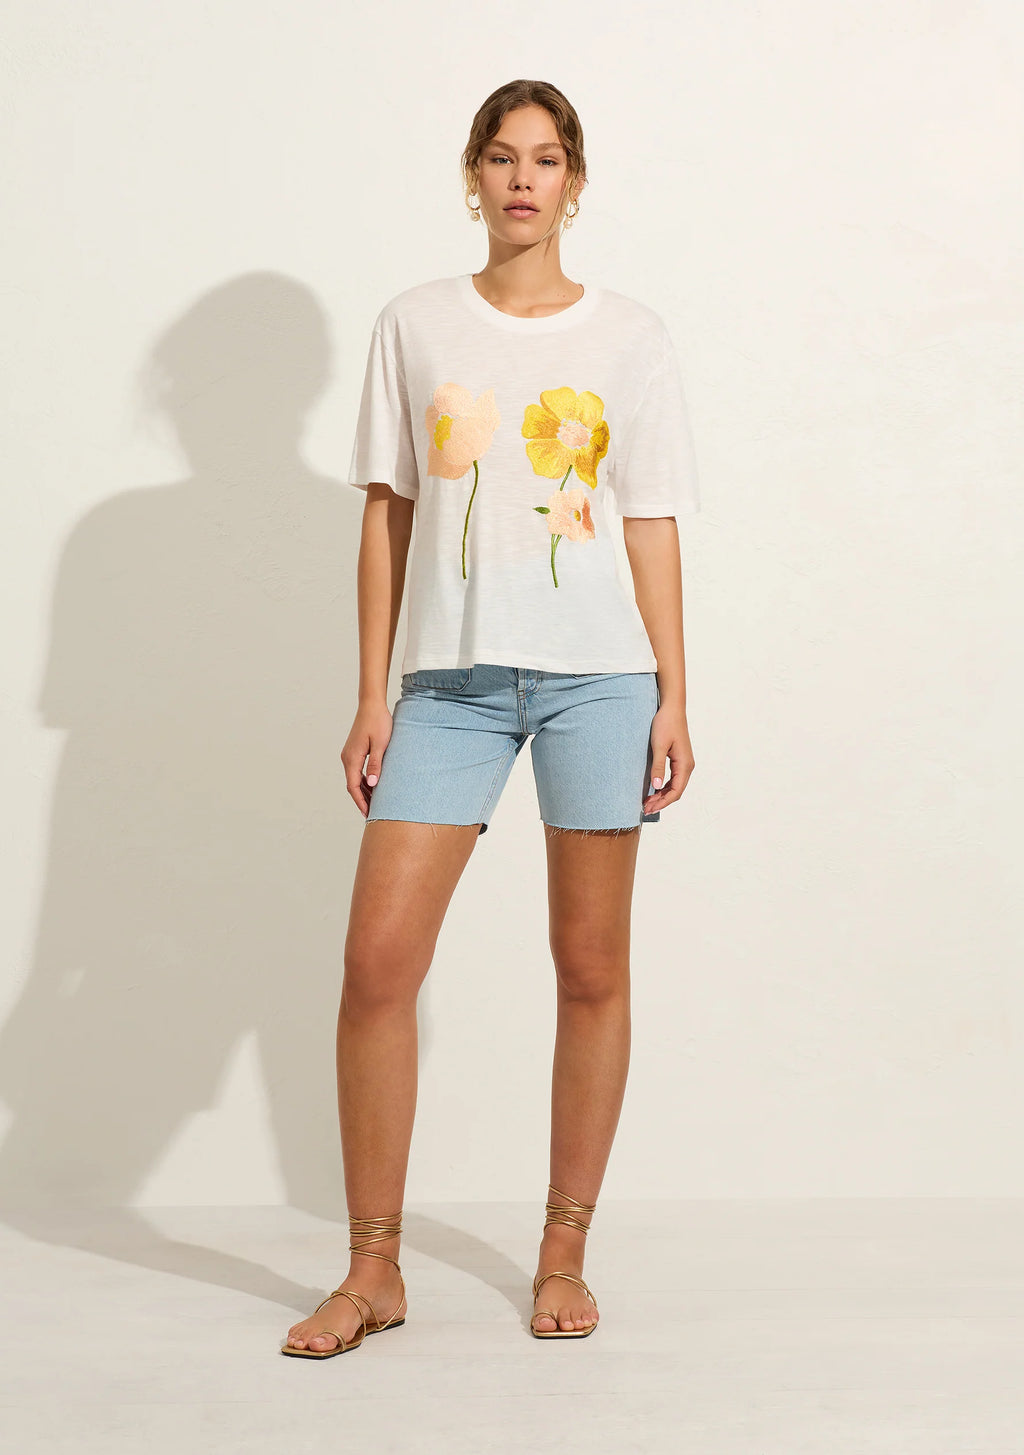 Auguste - Embroidery Oversize Tee - Off White